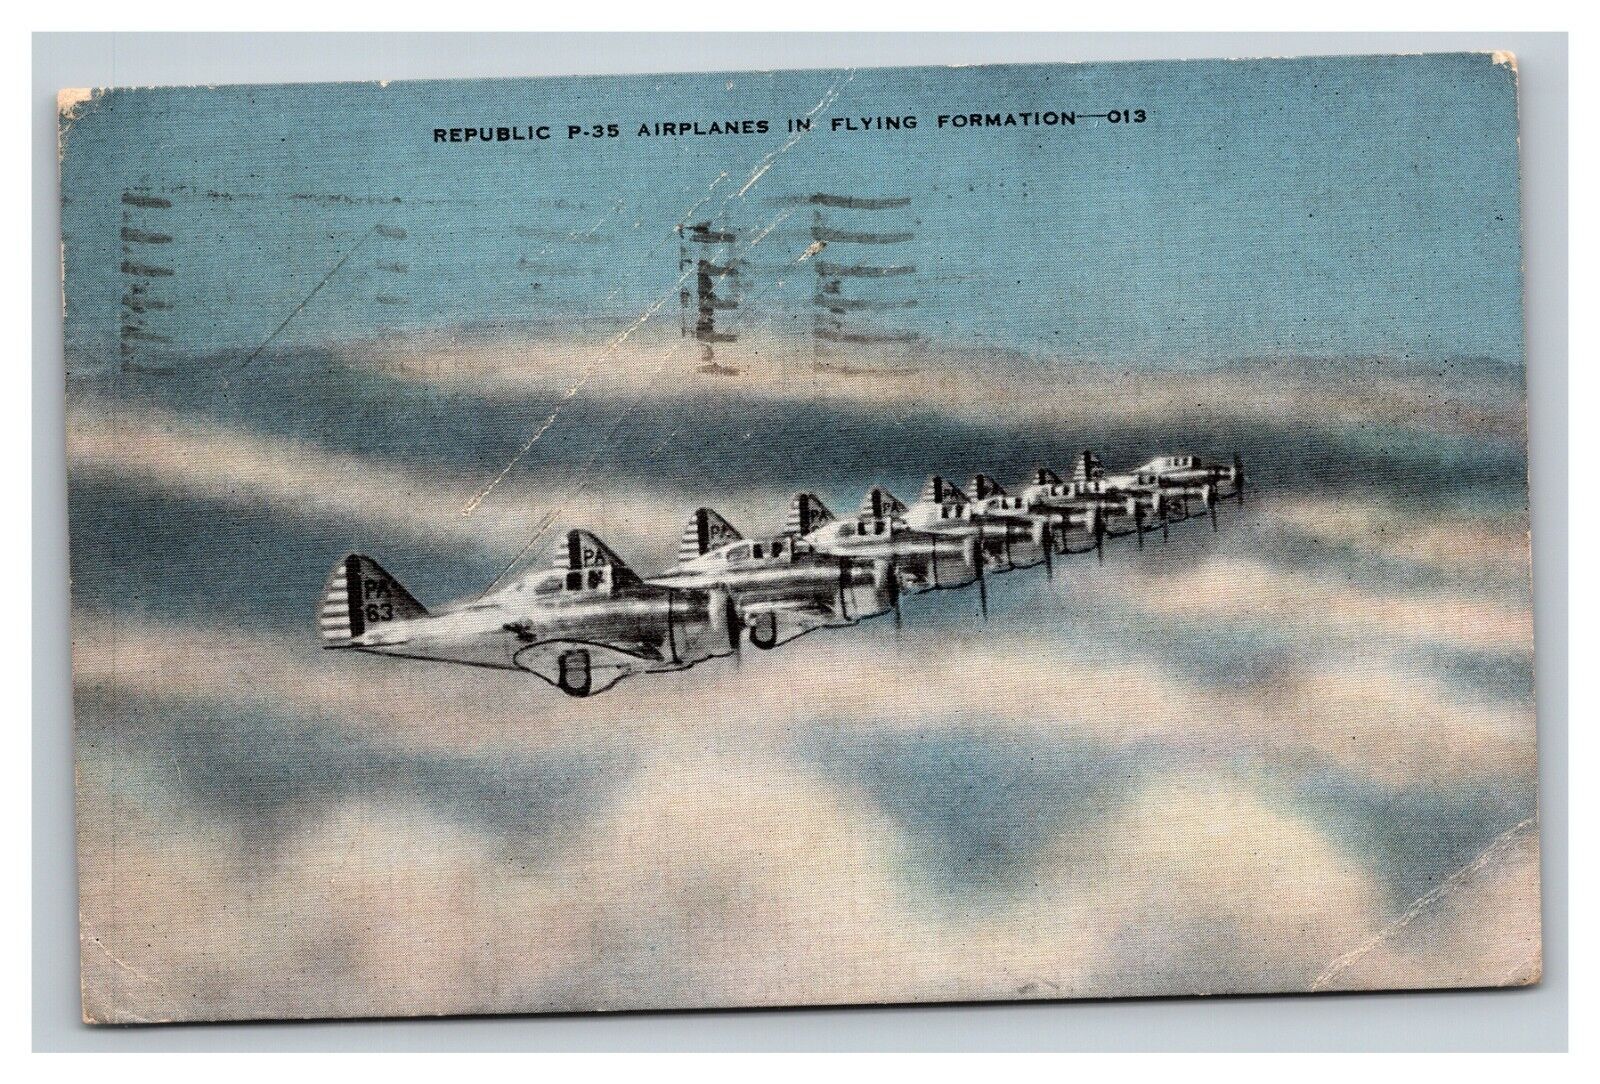 Vintage 1943 Military Postcard Republic P-35 Airplanes in Formation